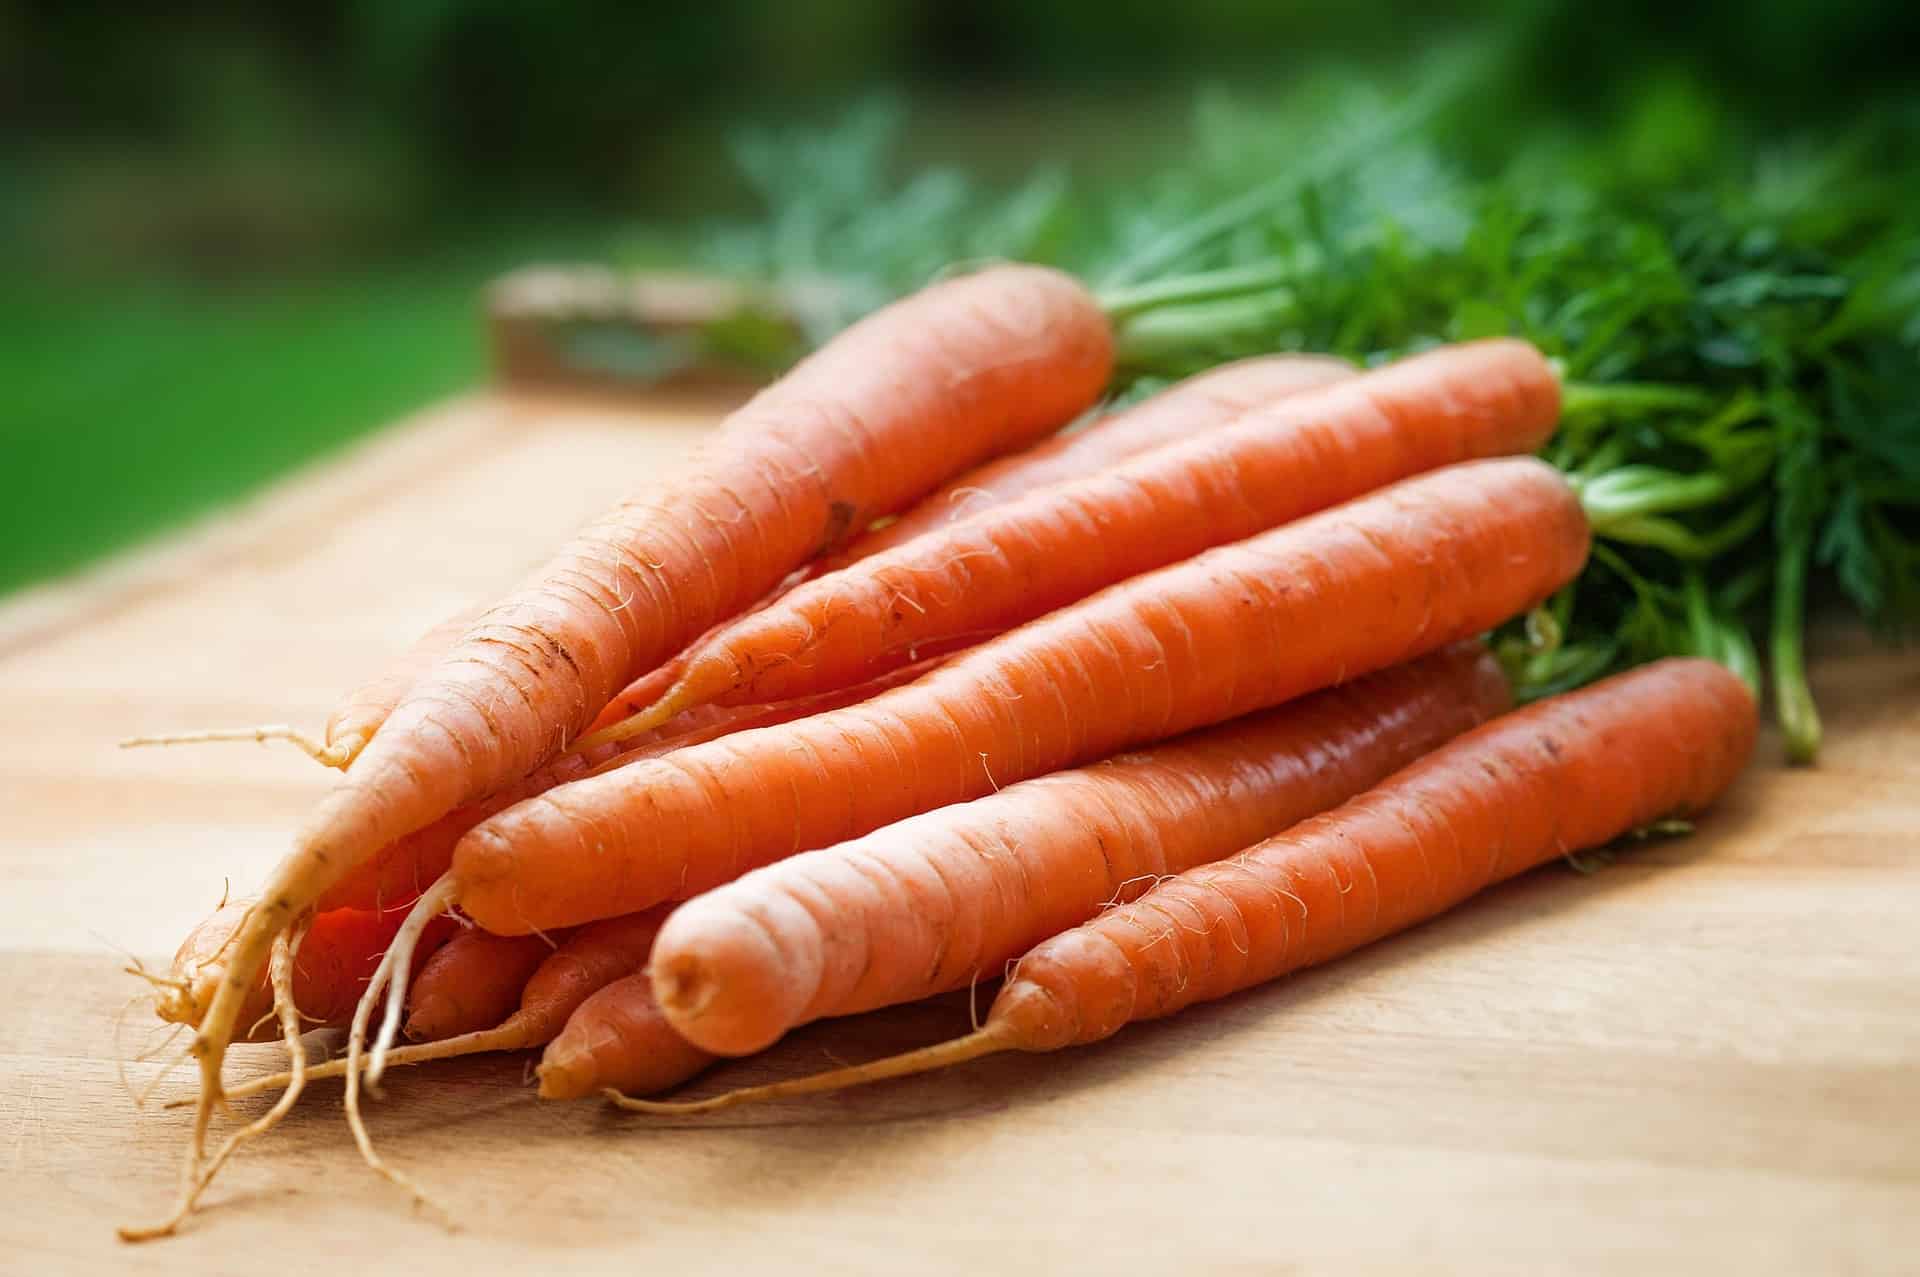 Growing Carrots at Home